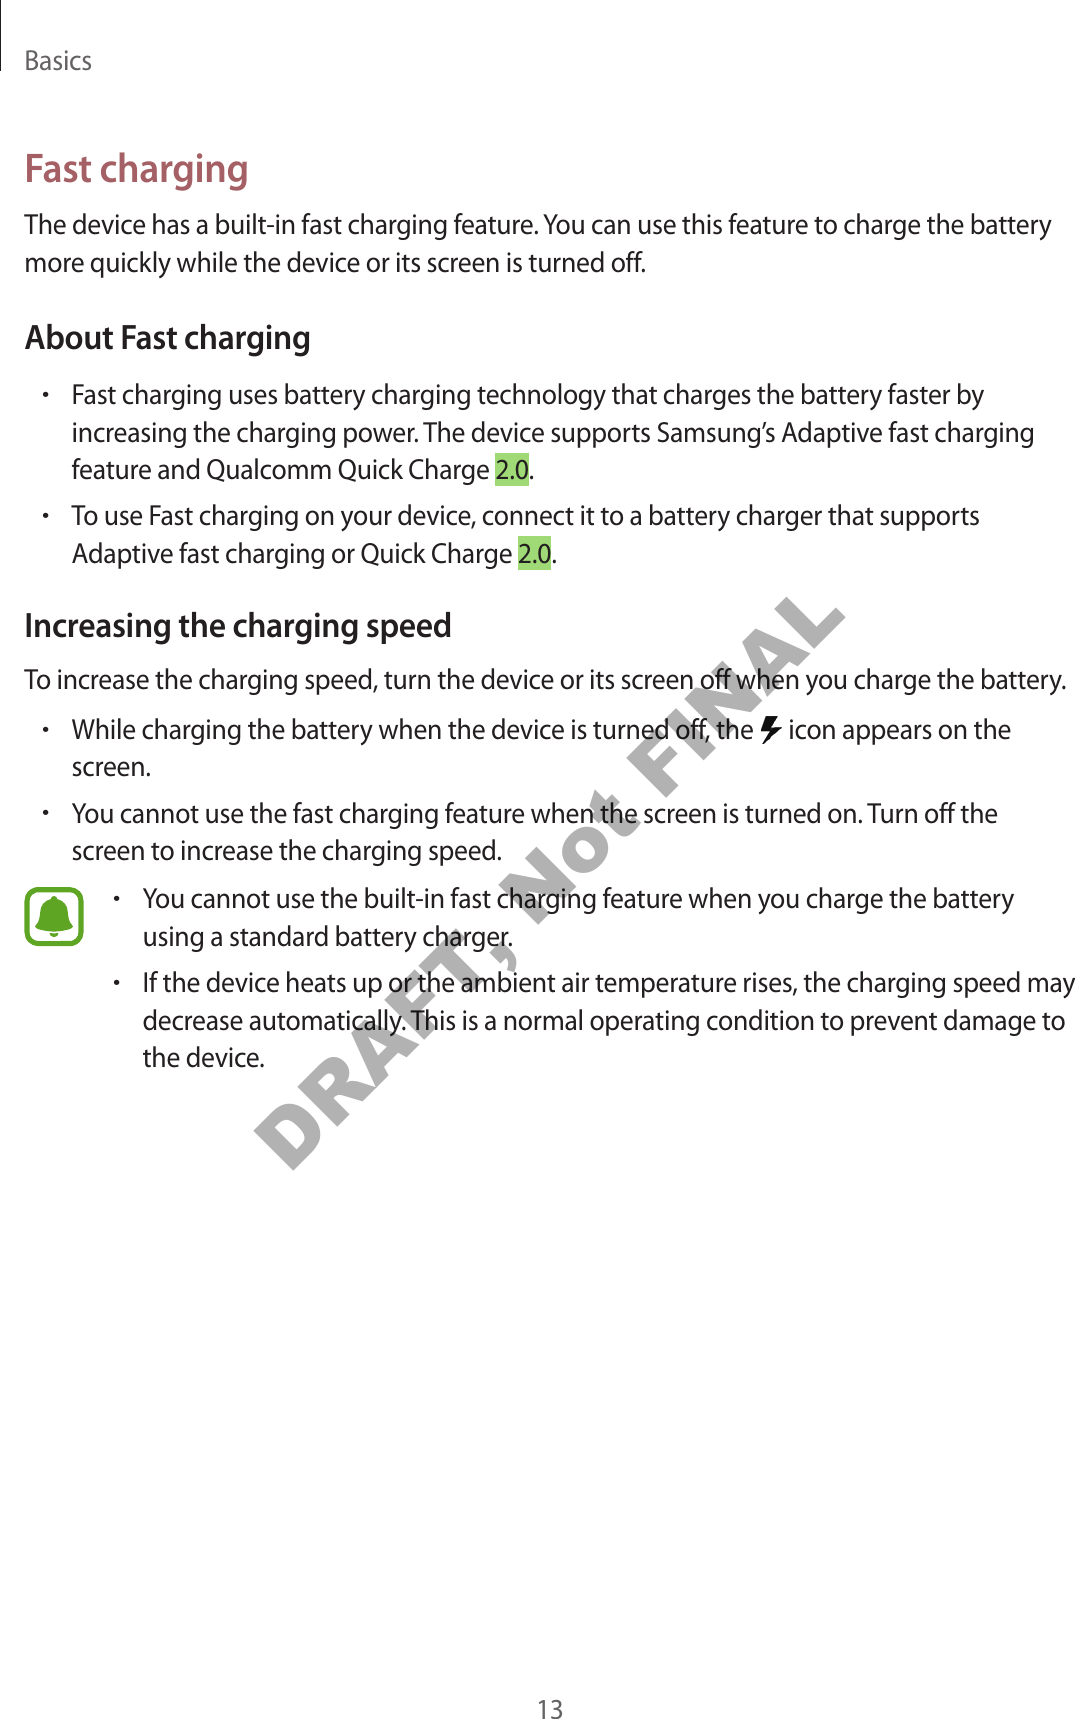 Basics13Fast chargingThe device has a built-in fast charging feature. You can use this feature to charge the battery more quickly while the device or its screen is turned off.About Fast charging•Fast charging uses battery charging technology that charges the battery faster byincreasing the charging power. The device supports Samsung’s Adaptive fast chargingfeature and Qualcomm Quick Charge 2.0.•To use Fast charging on your device, connect it to a battery charger that supportsAdaptive fast charging or Quick Charge 2.0.Increasing the charging speedTo increase the charging speed, turn the device or its screen off when you charge the battery.•While charging the battery when the device is turned off, the   icon appears on thescreen.•You cannot use the fast charging feature when the screen is turned on. Turn off thescreen to increase the charging speed.•You cannot use the built-in fast charging feature when you charge the batteryusing a standard battery charger.•If the device heats up or the ambient air temperature rises, the charging speed maydecrease automatically. This is a normal operating condition to prevent damage tothe device.DRAFT, Not FINAL